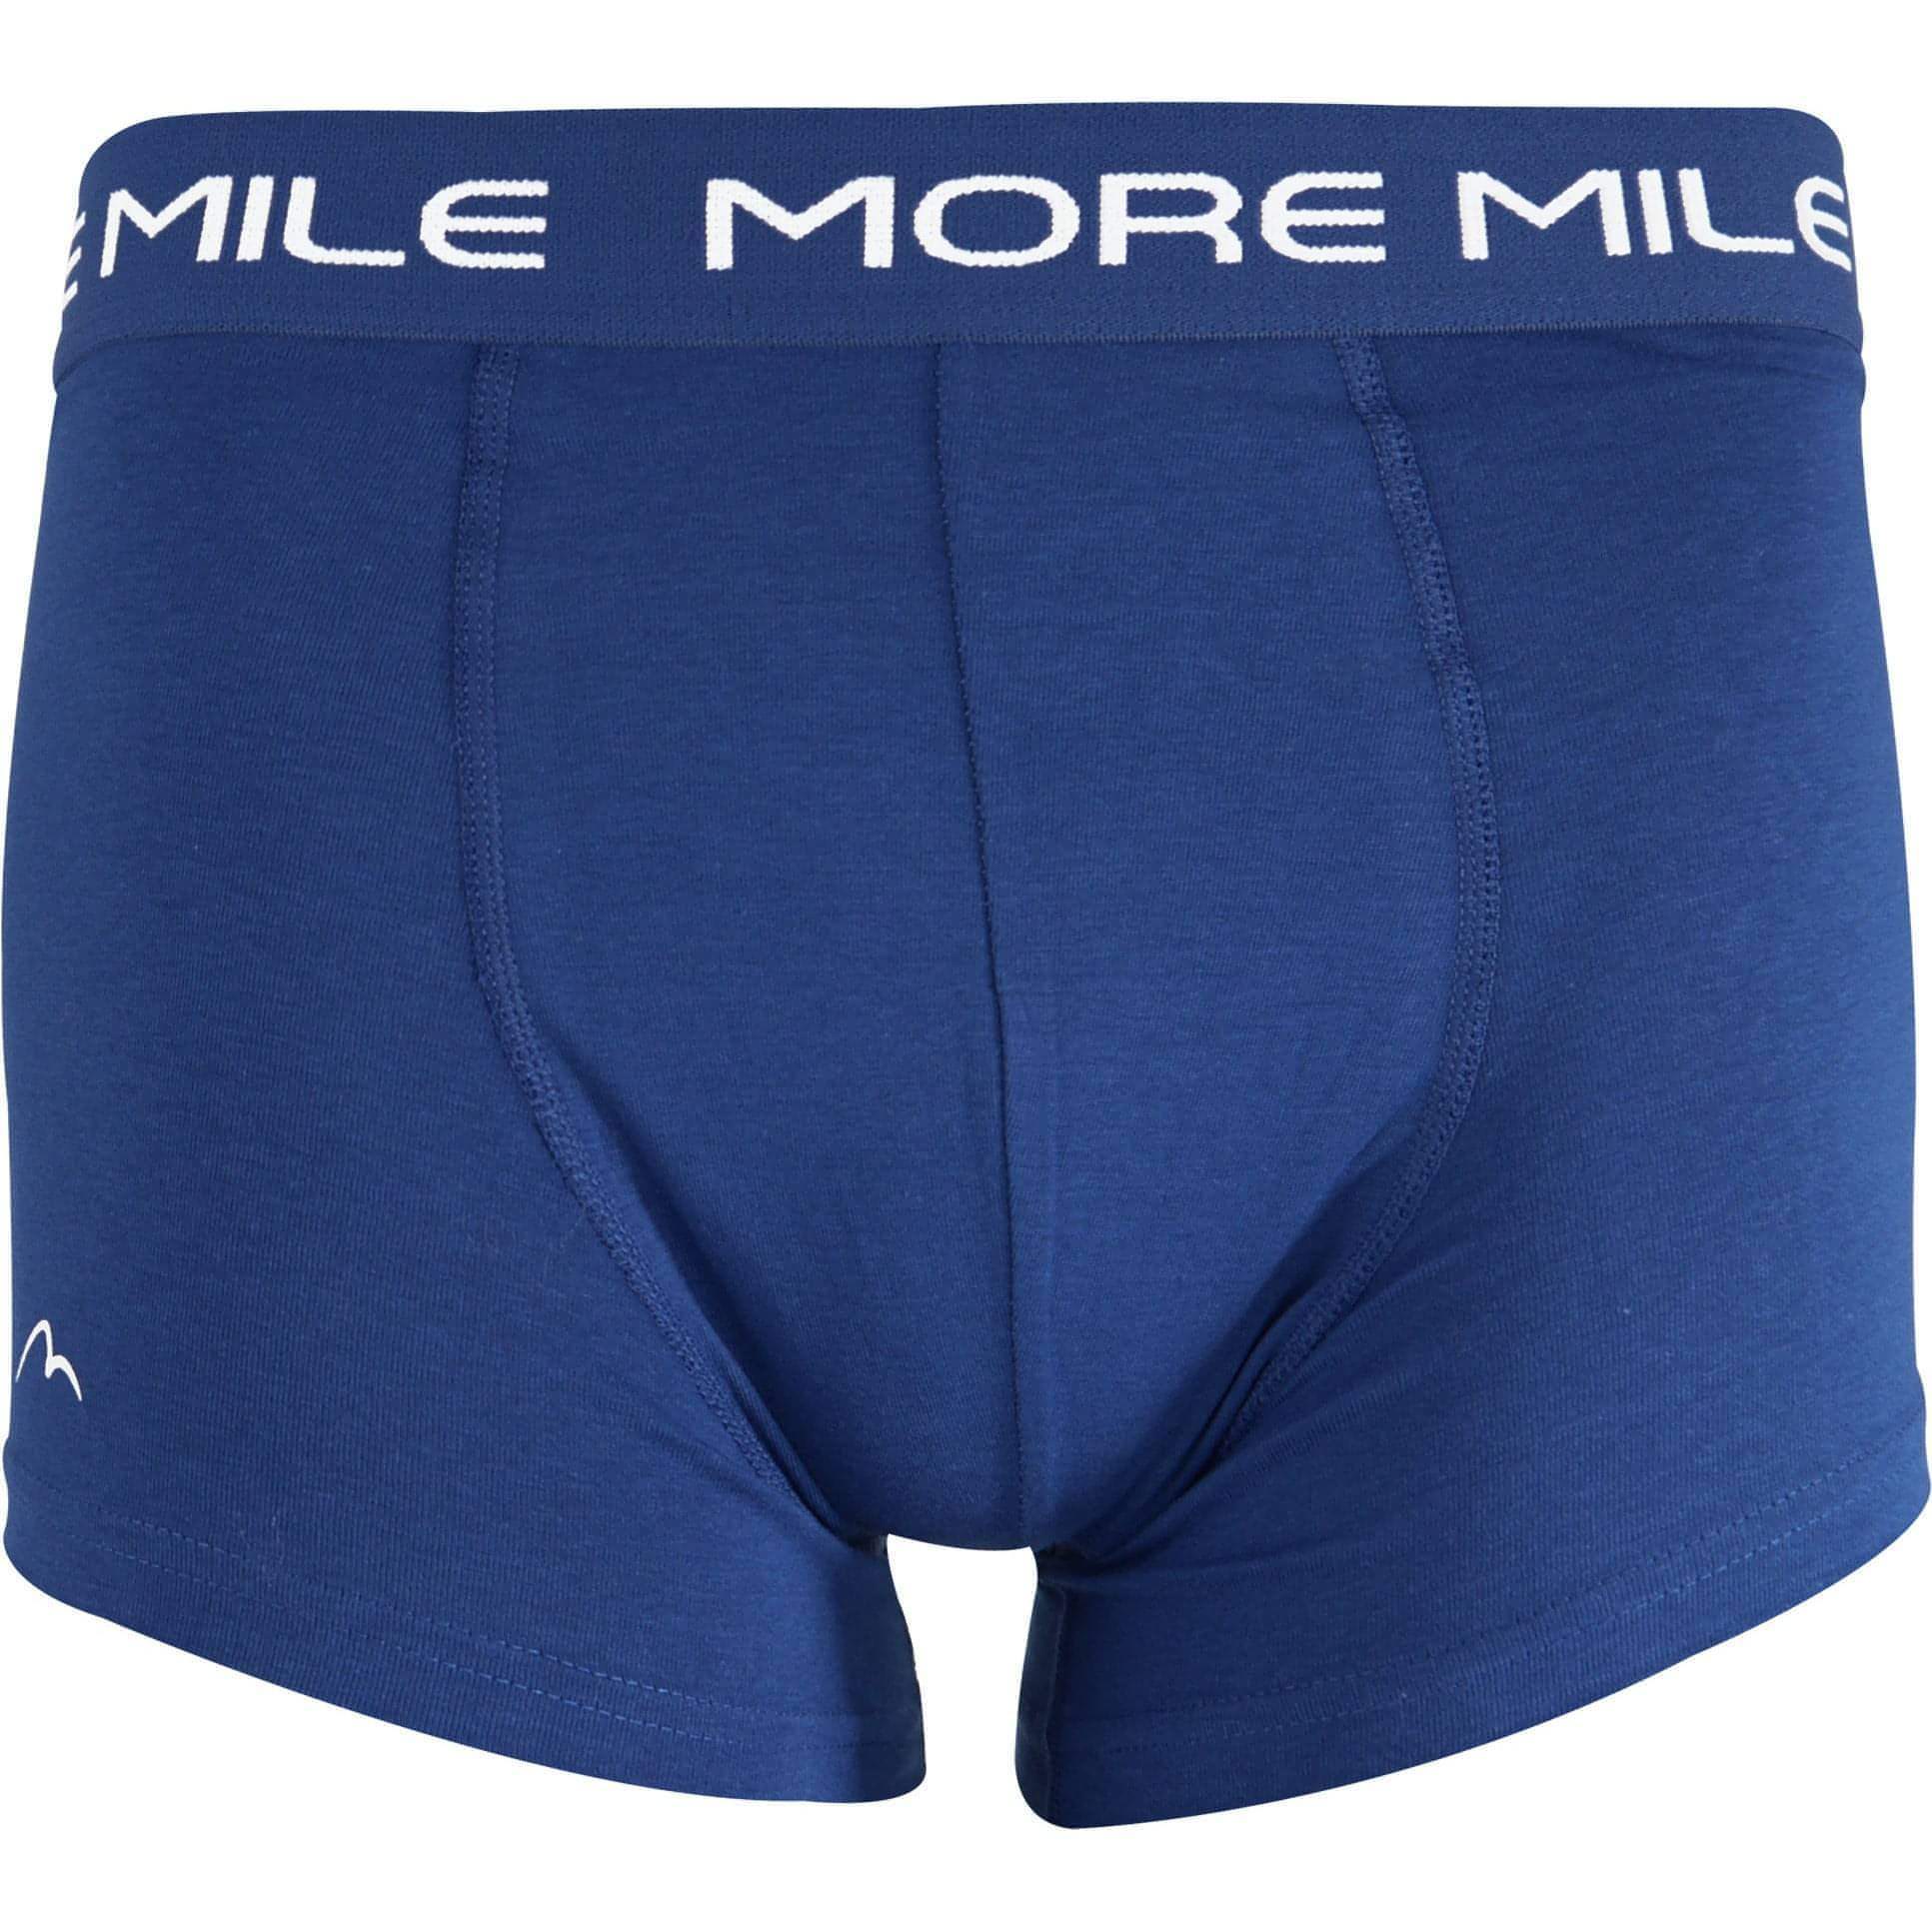 More Mile Pack Boxer 1P204881Wn Bluegrey Limogesblue Front - Front View